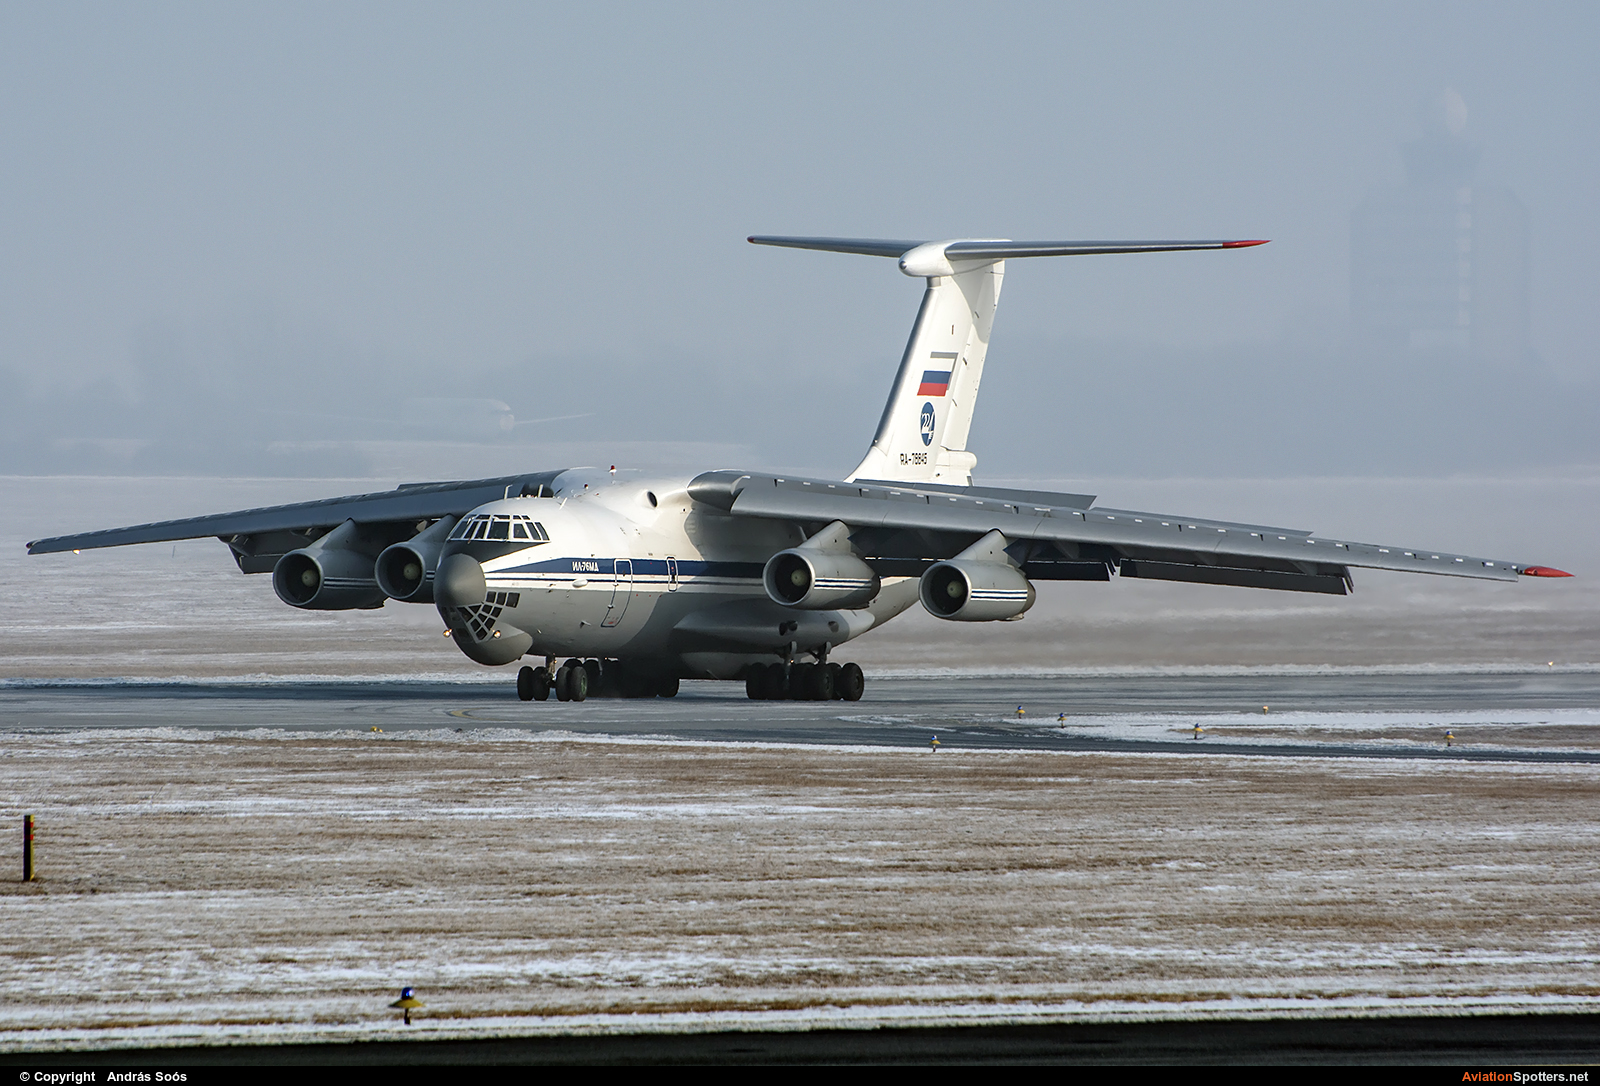 Russia - Air Force  -  Il-76MD  (RA-78845) By András Soós (sas1965)